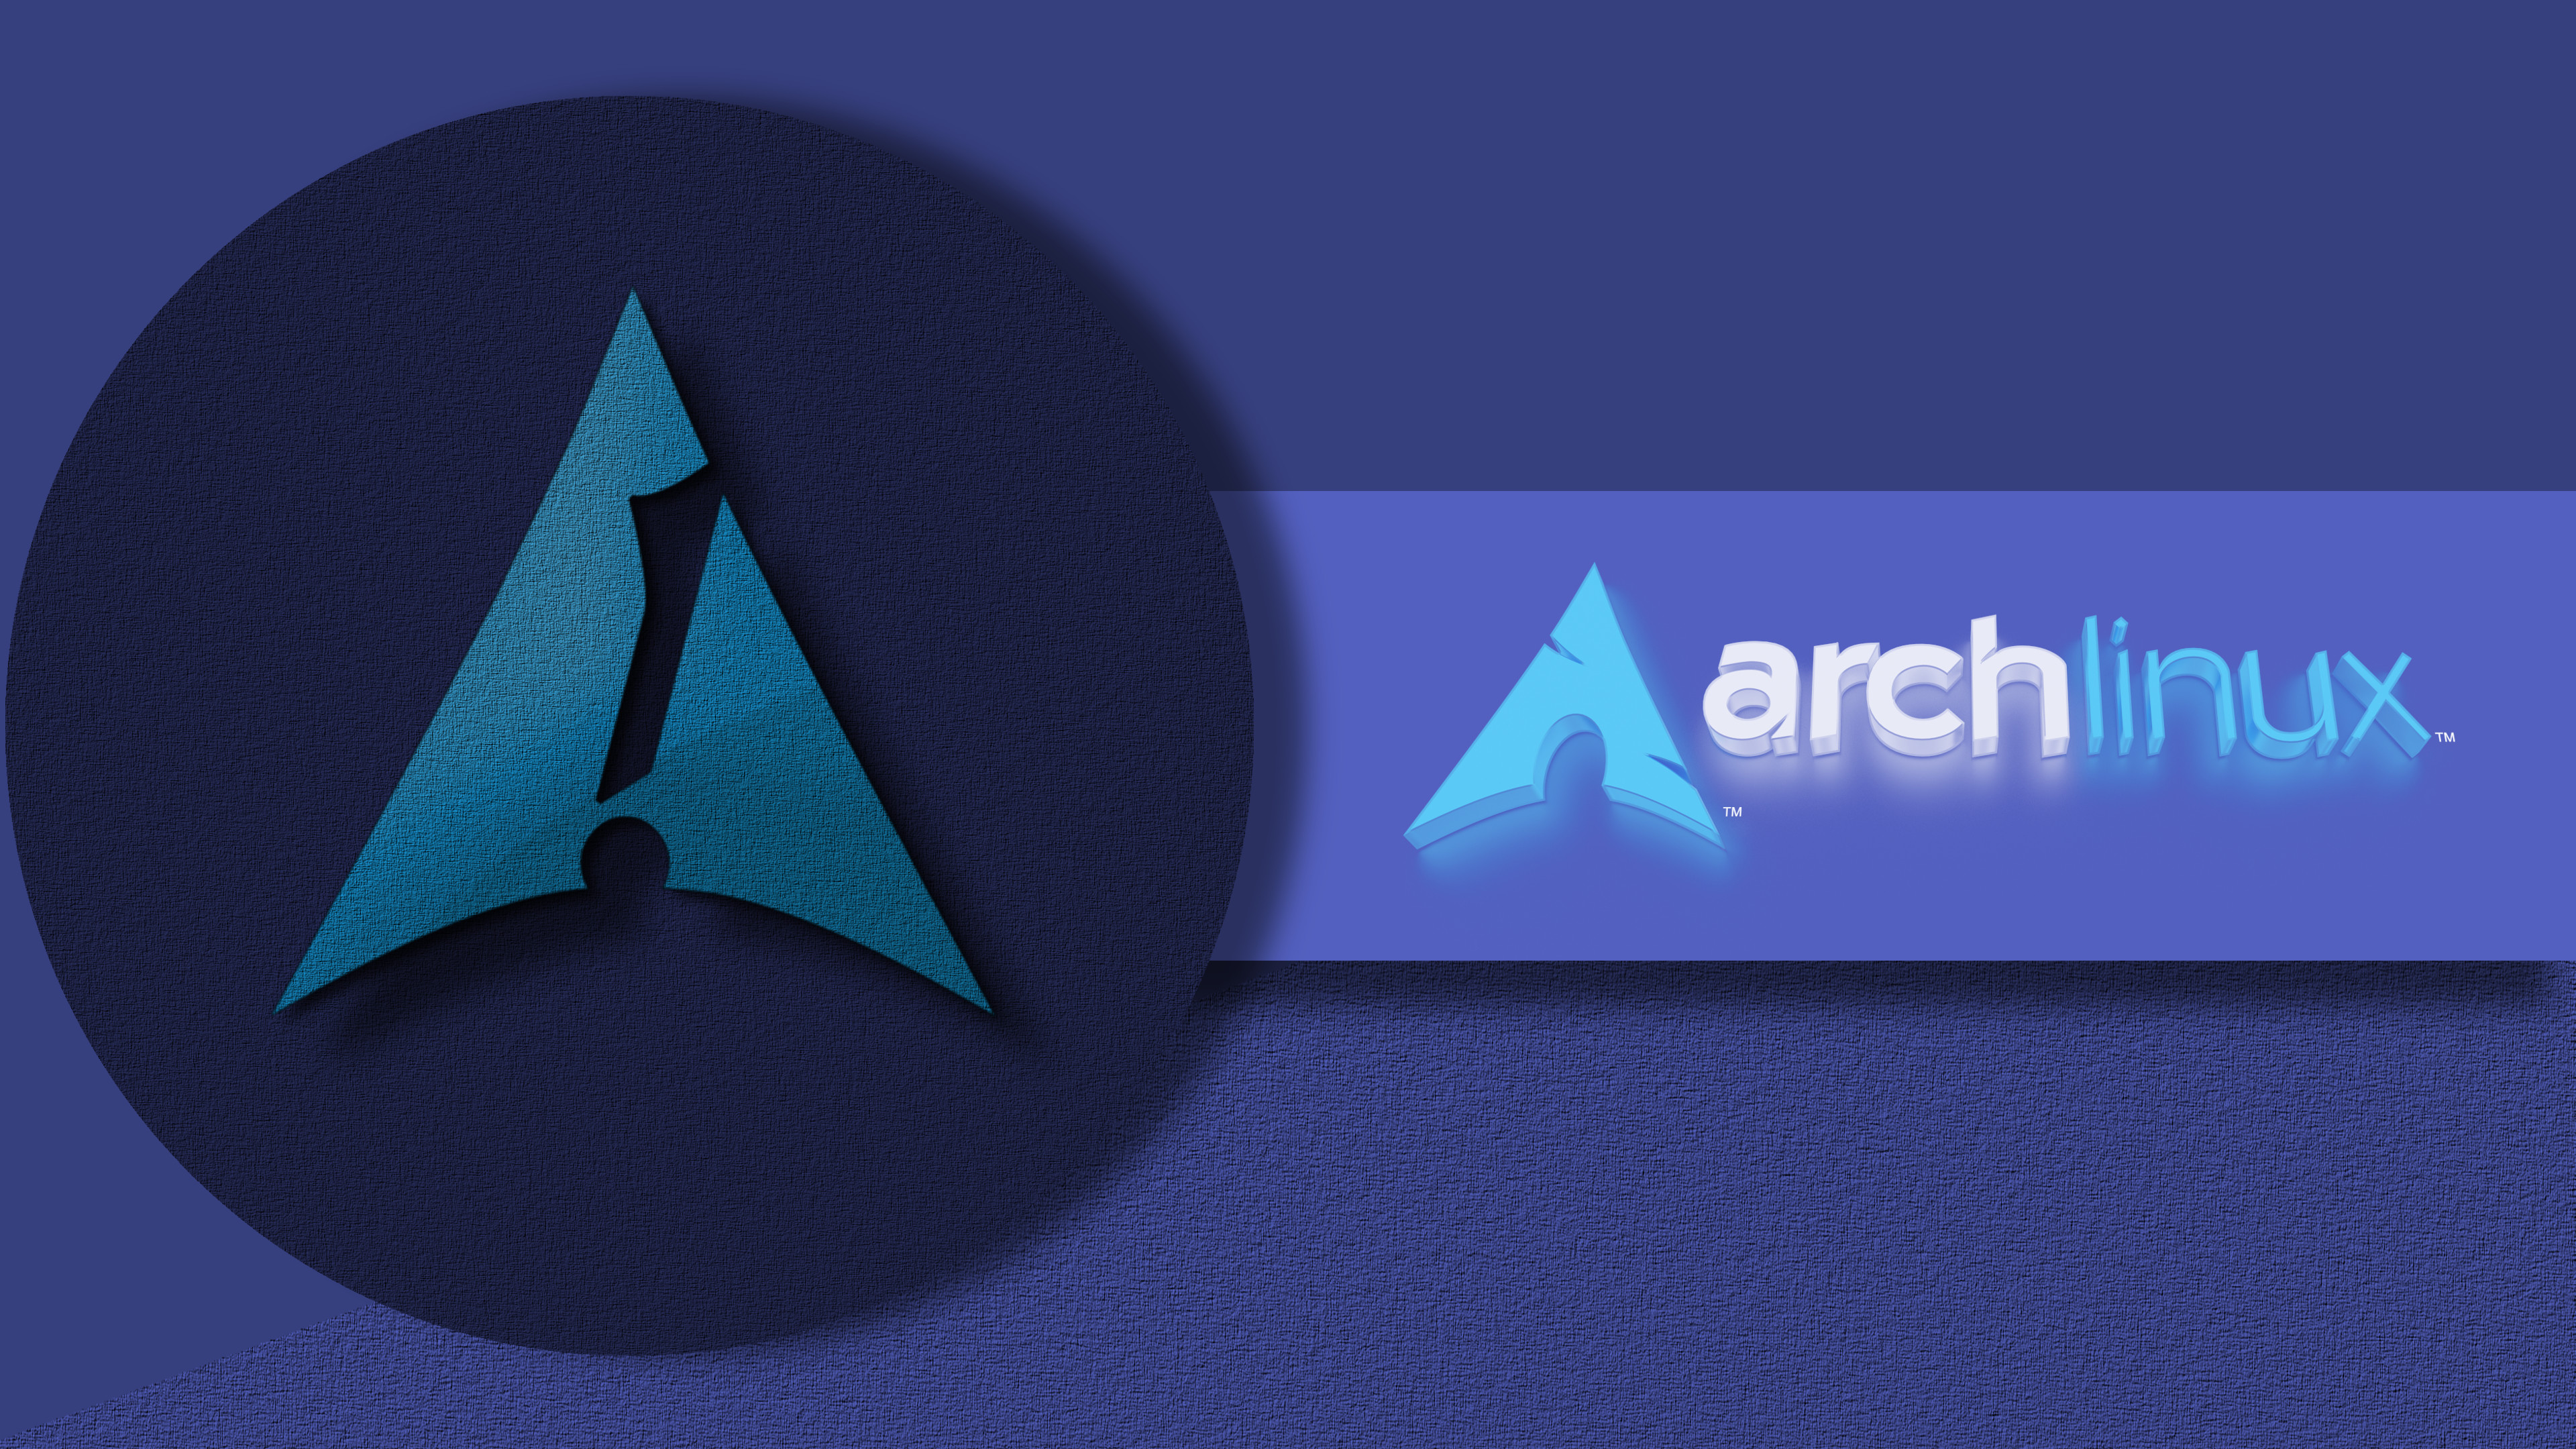 3840x2160 ... Arch Linux 4K Wallpaper 051 by Charlie-Henson